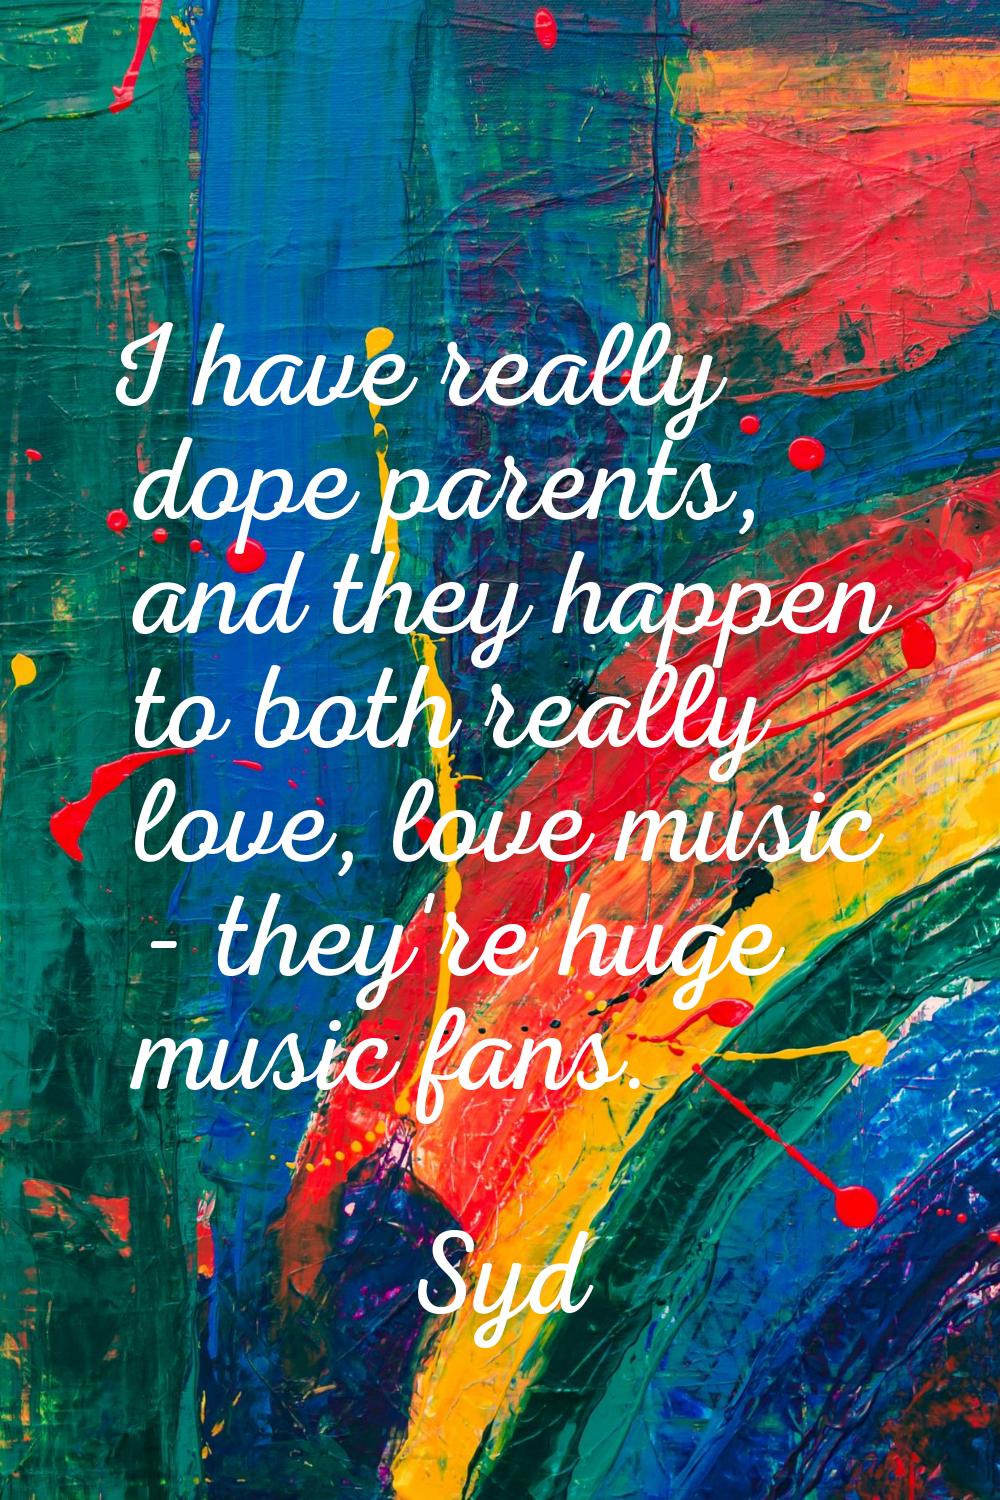 I have really dope parents, and they happen to both really love, love music - they're huge music fa